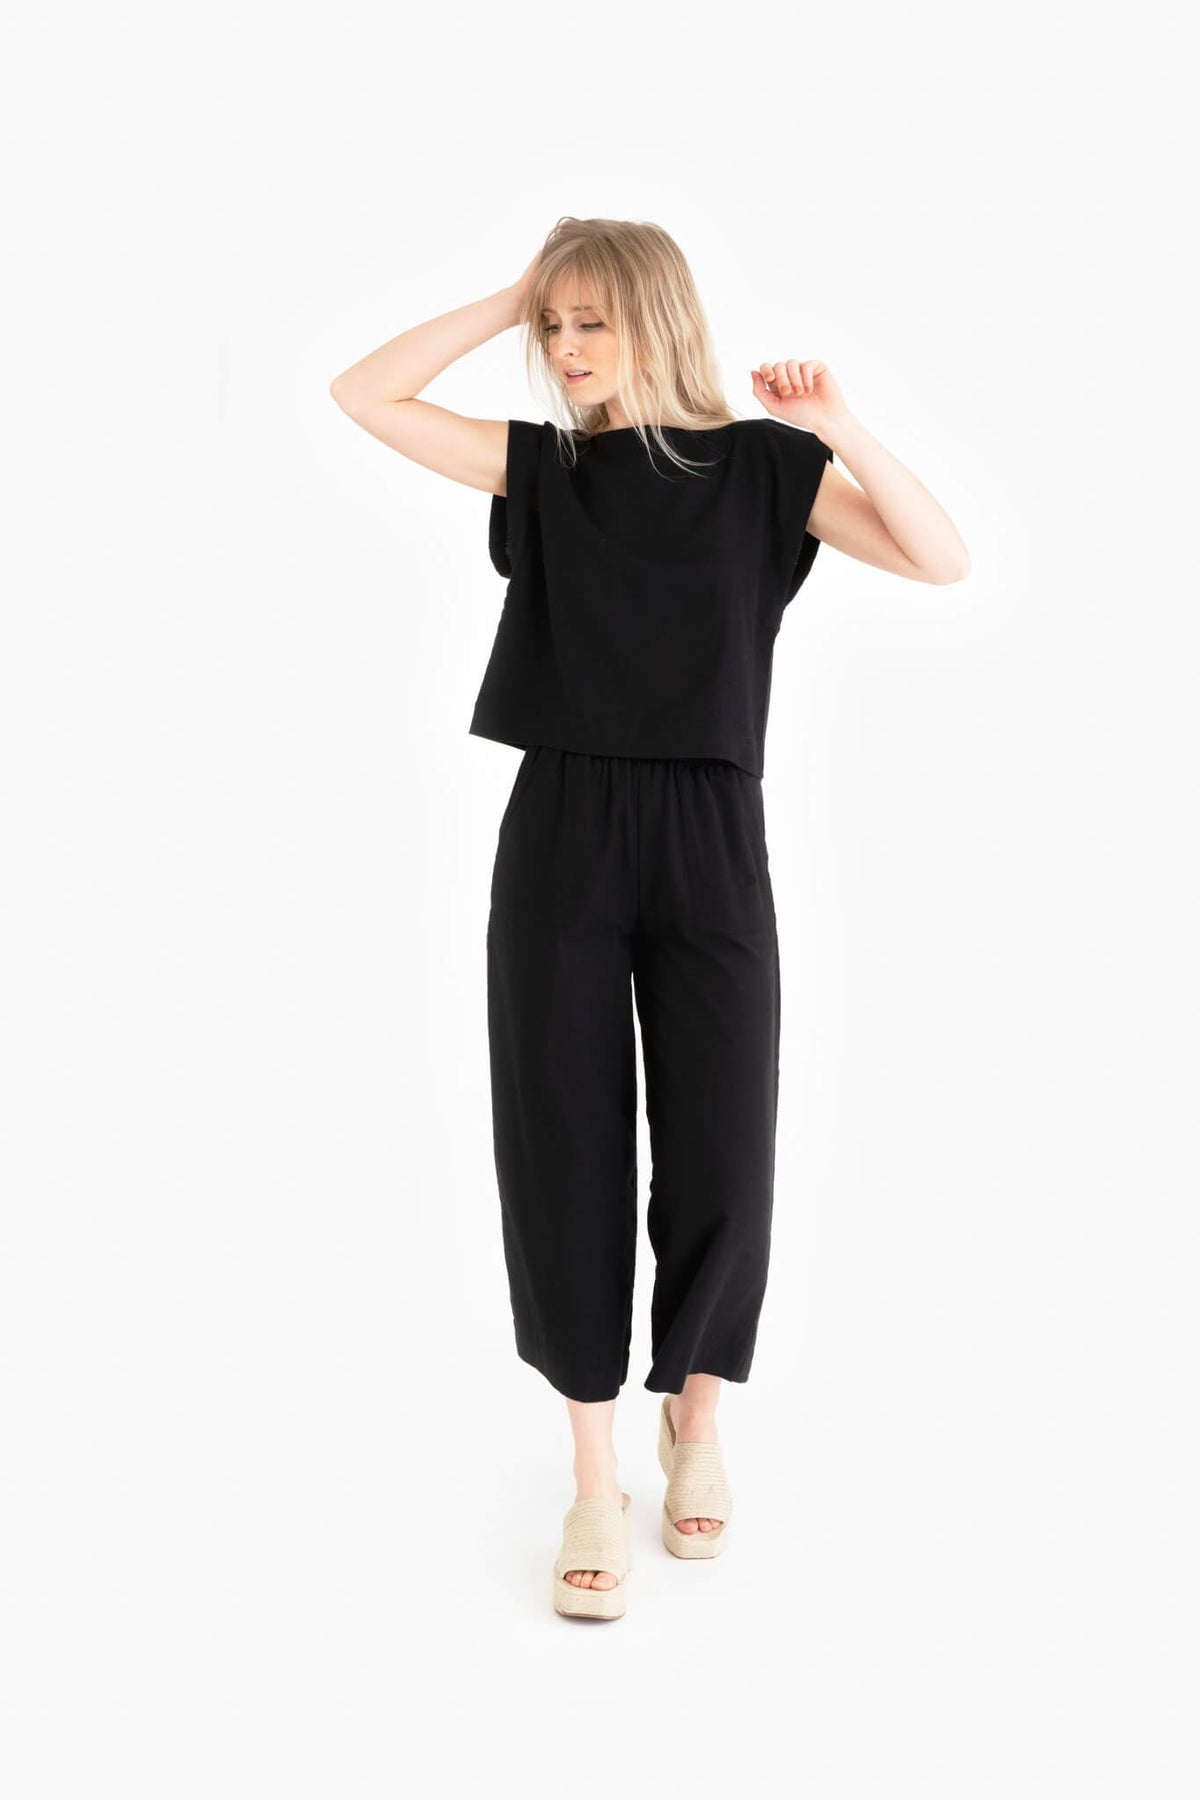 LAUDE The Label Everyday Crop Pant in Black